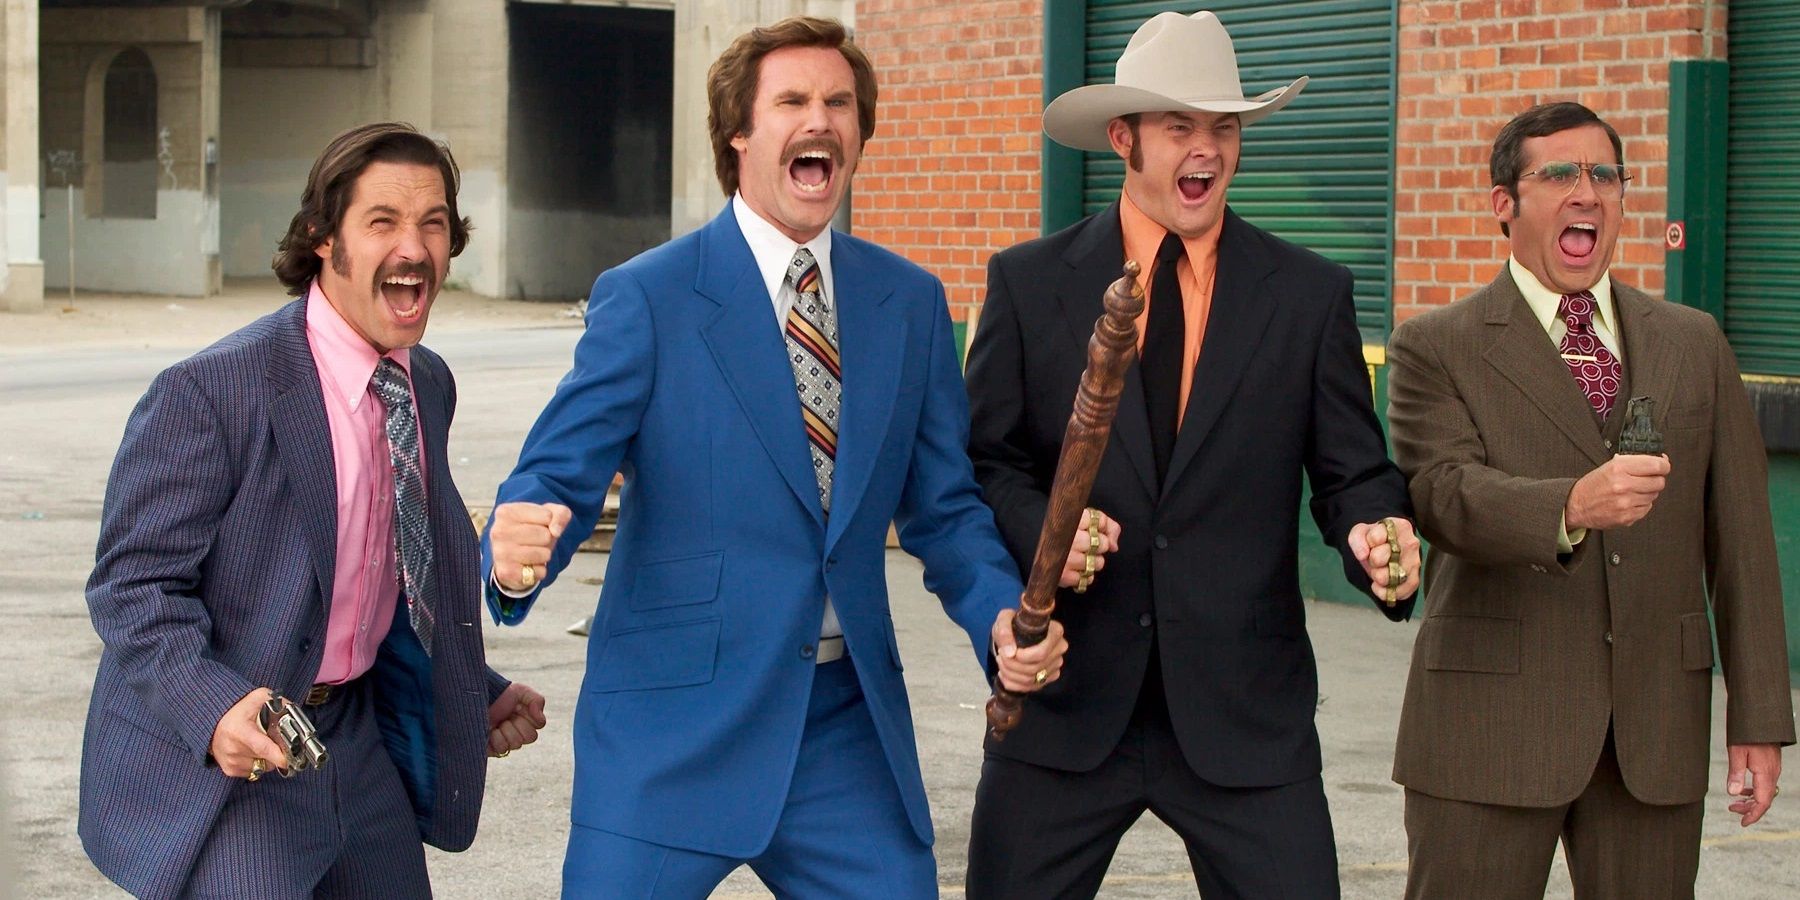 The news team in Anchorman